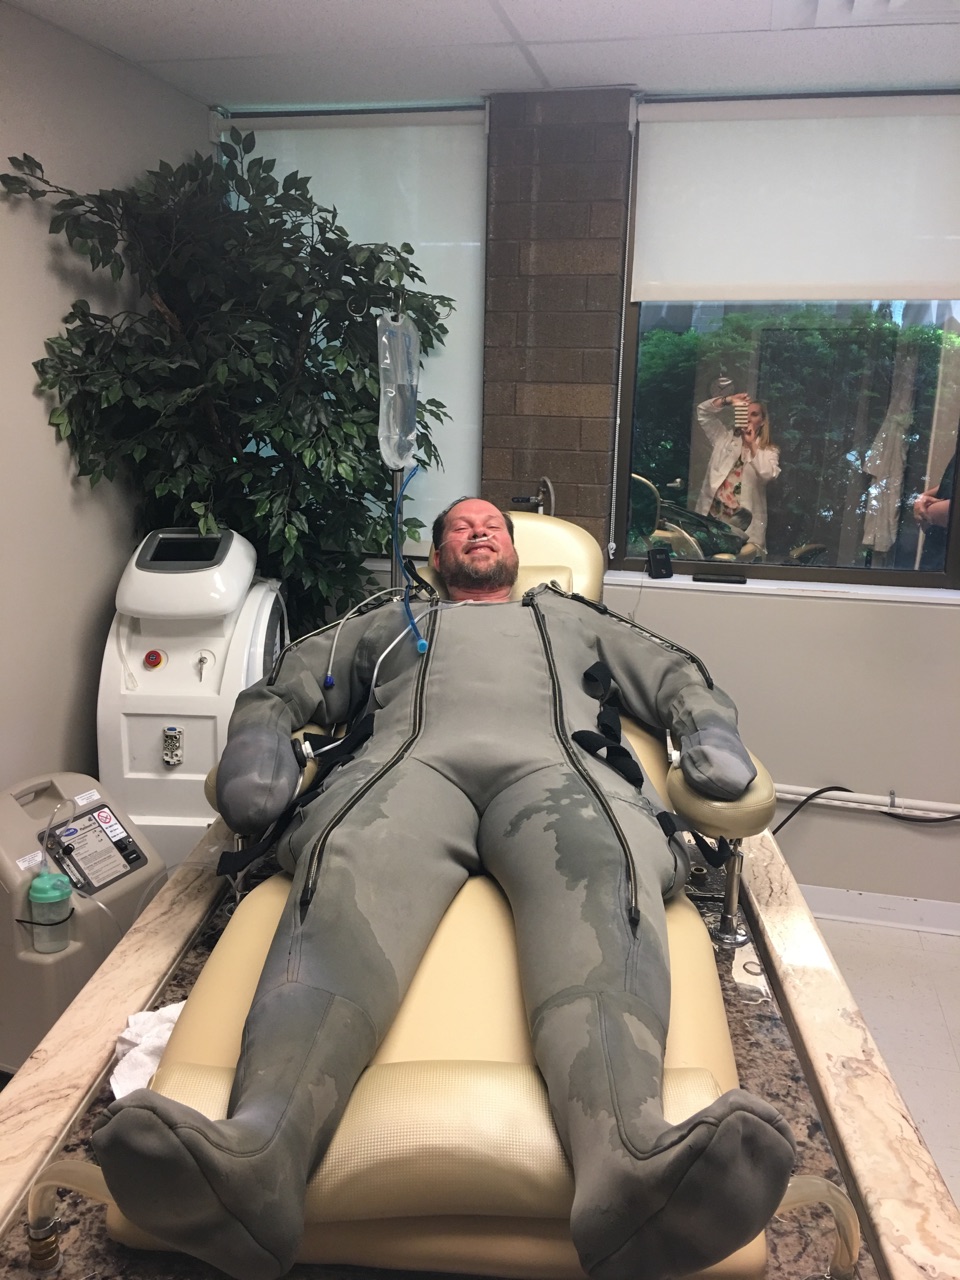 Brett in the Hyperthermia Suit at the FAR Clinic